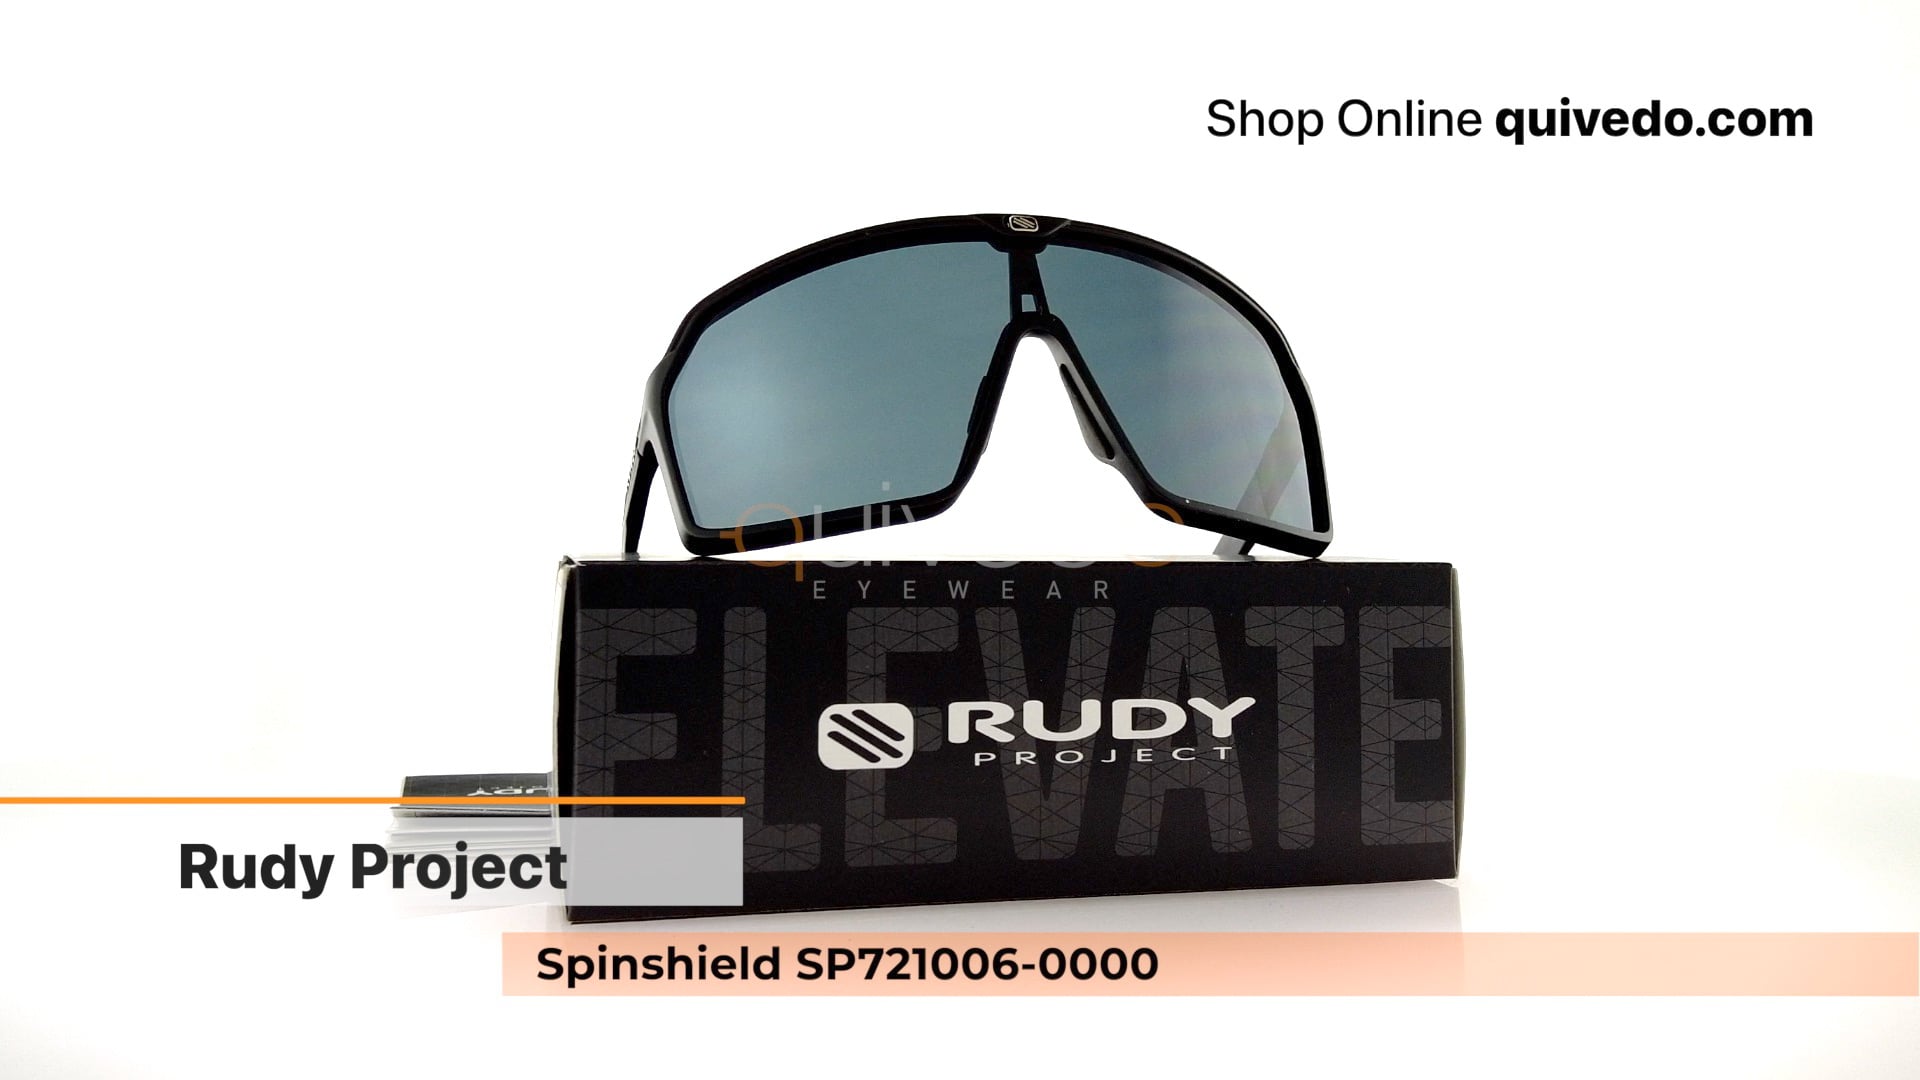 Rudy Project Spinshield SP721006-0000